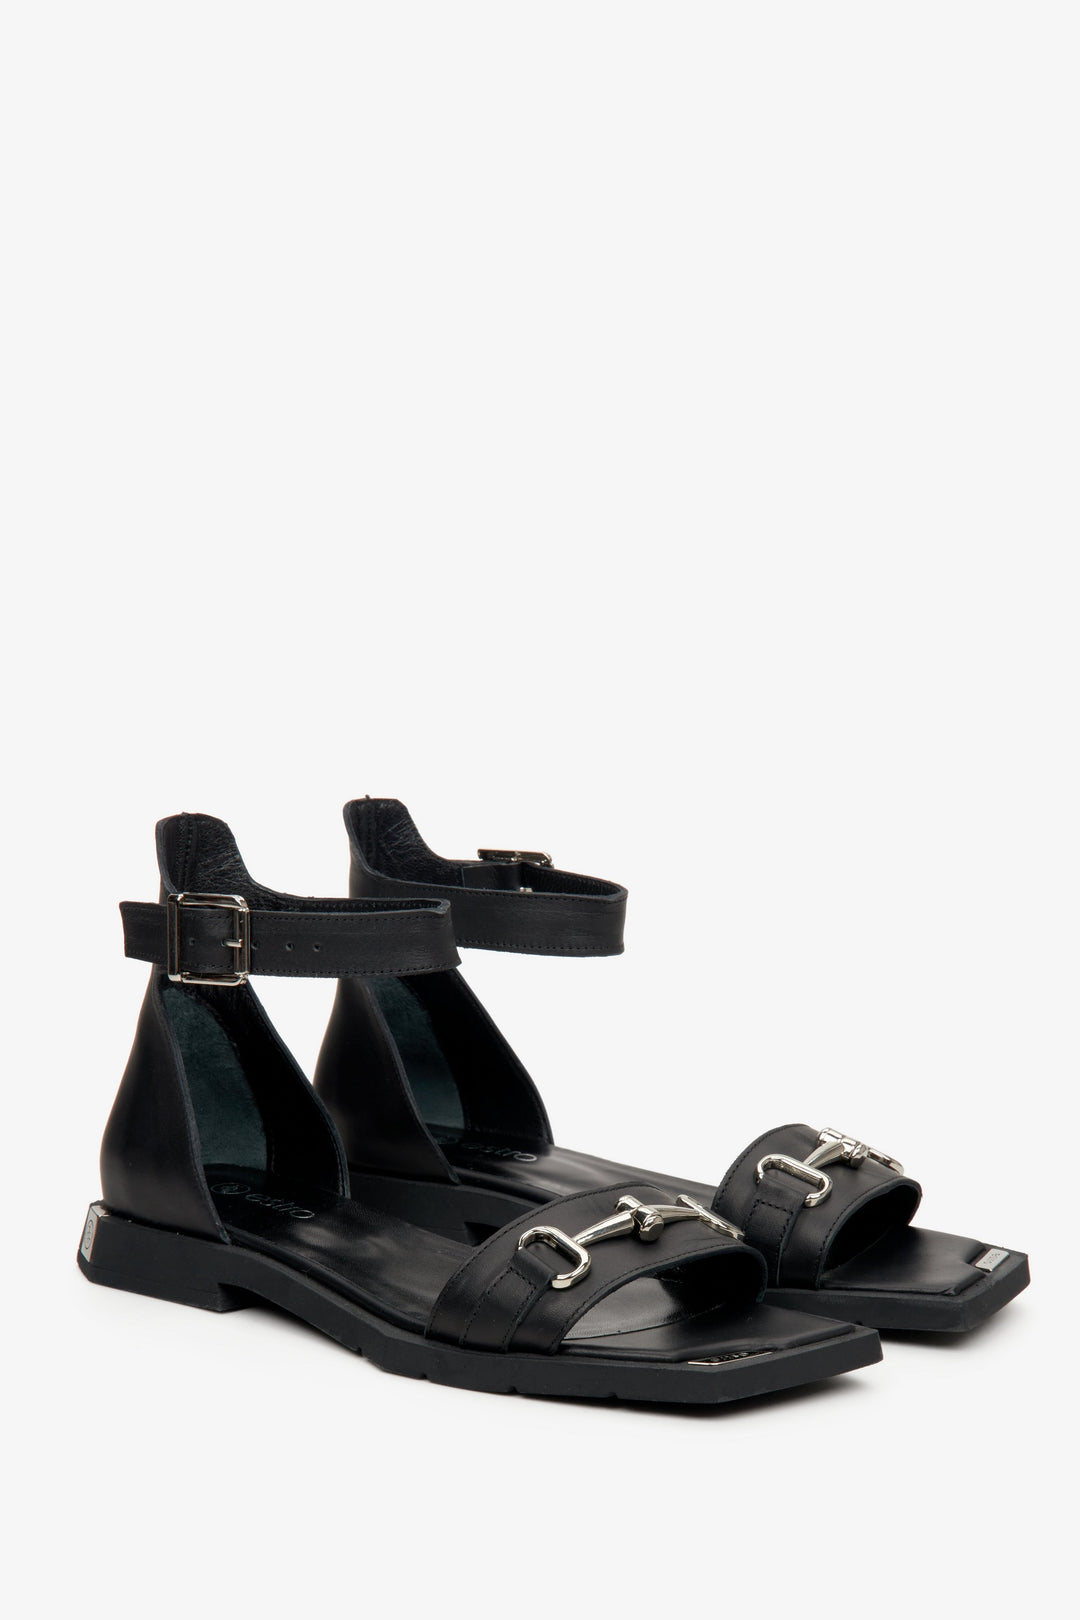 Women's black sandals for summer by Estro - presentation of the toe.